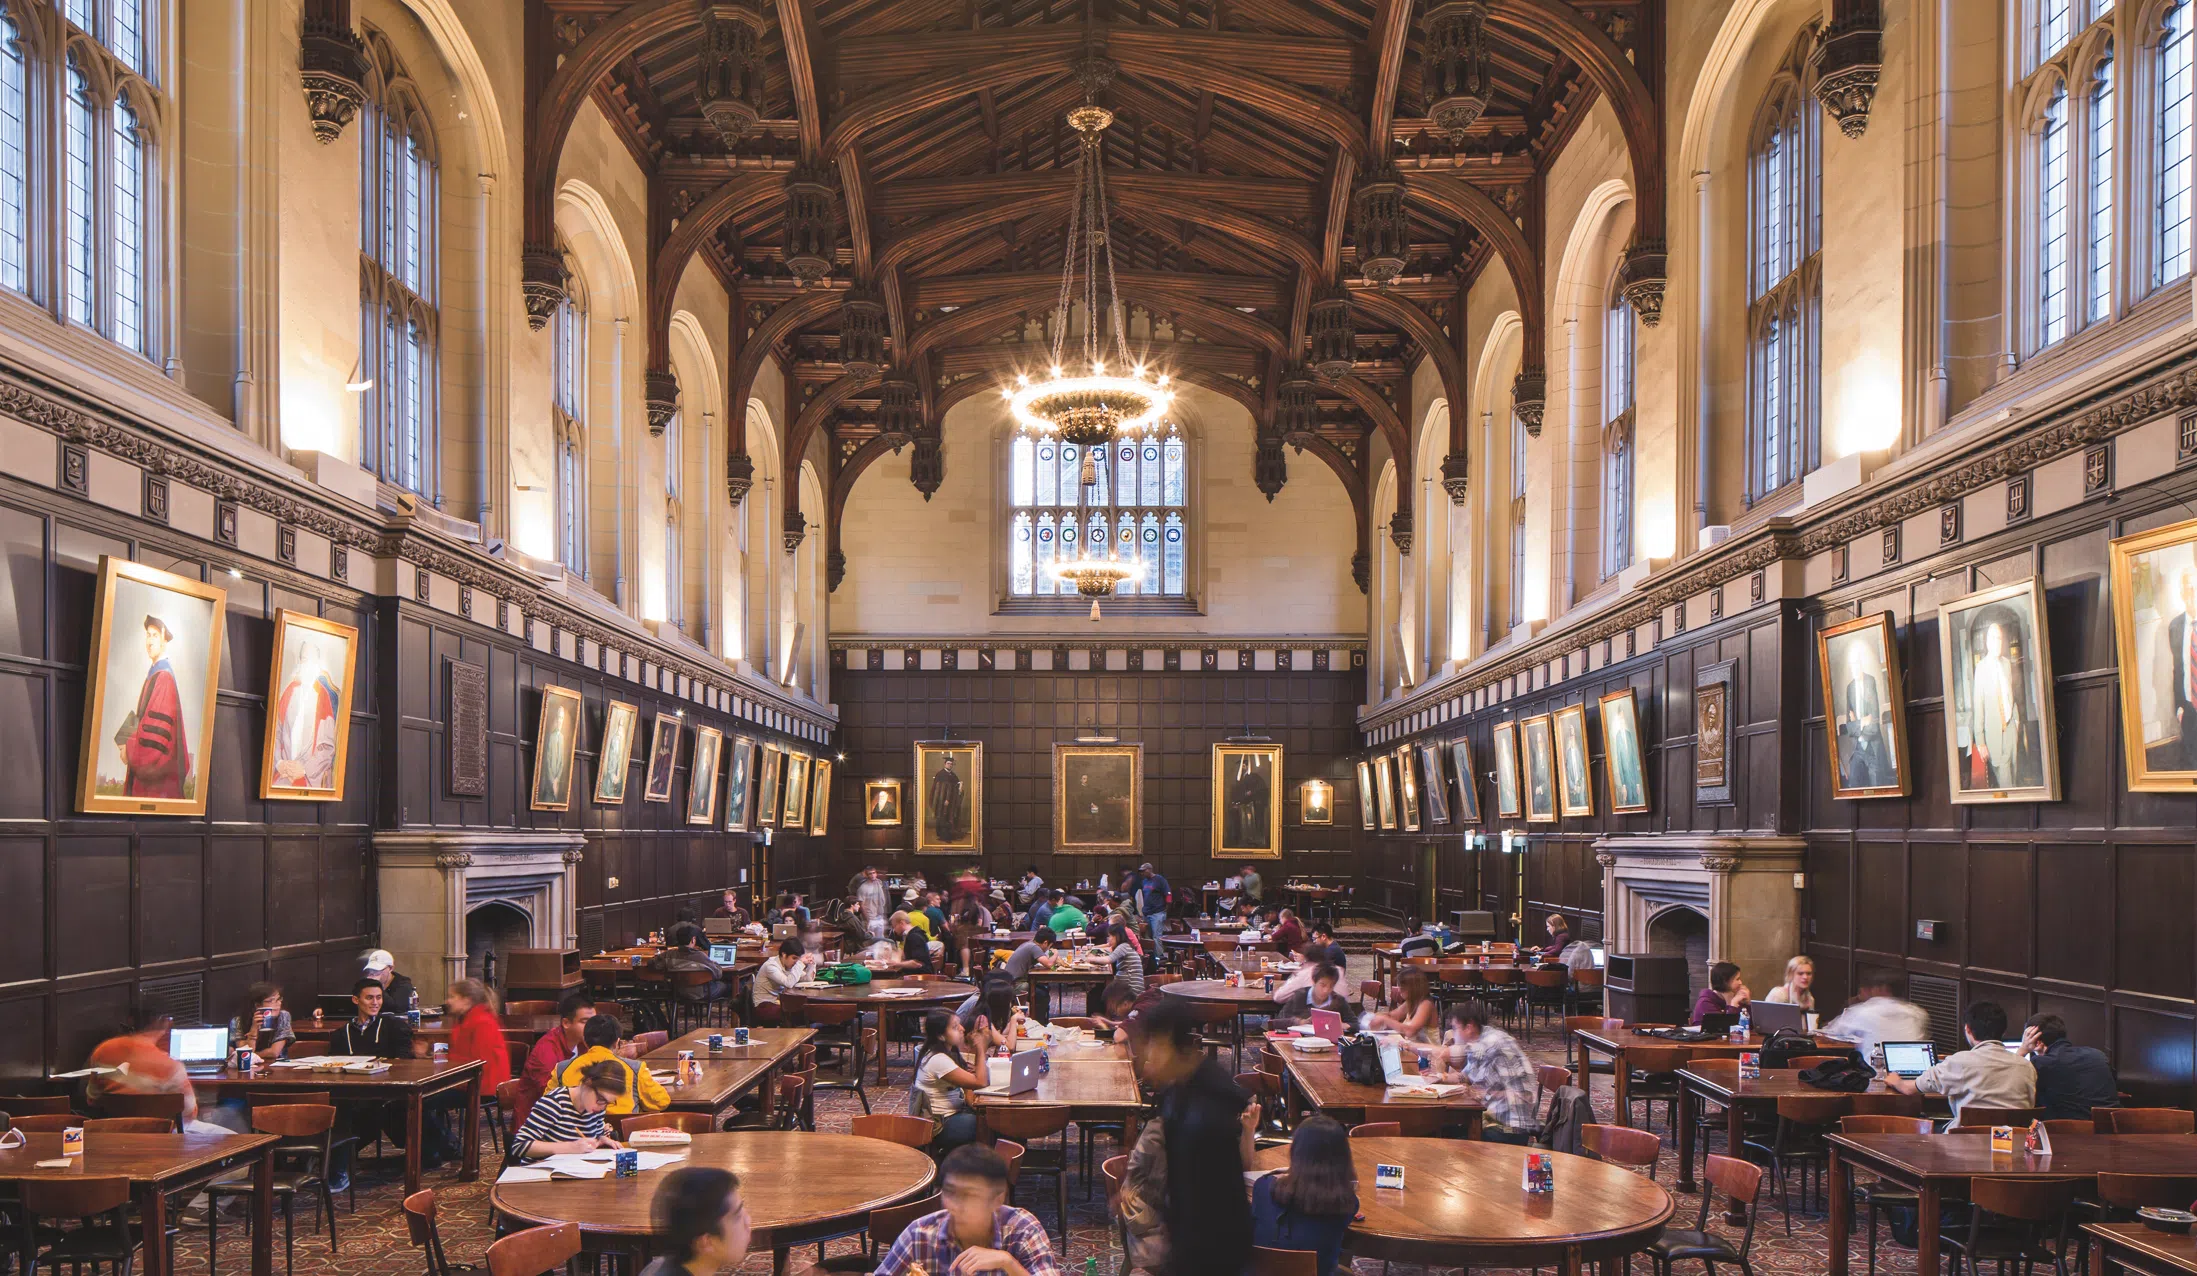 A large room filled with tables and students. Portraits line the walls.